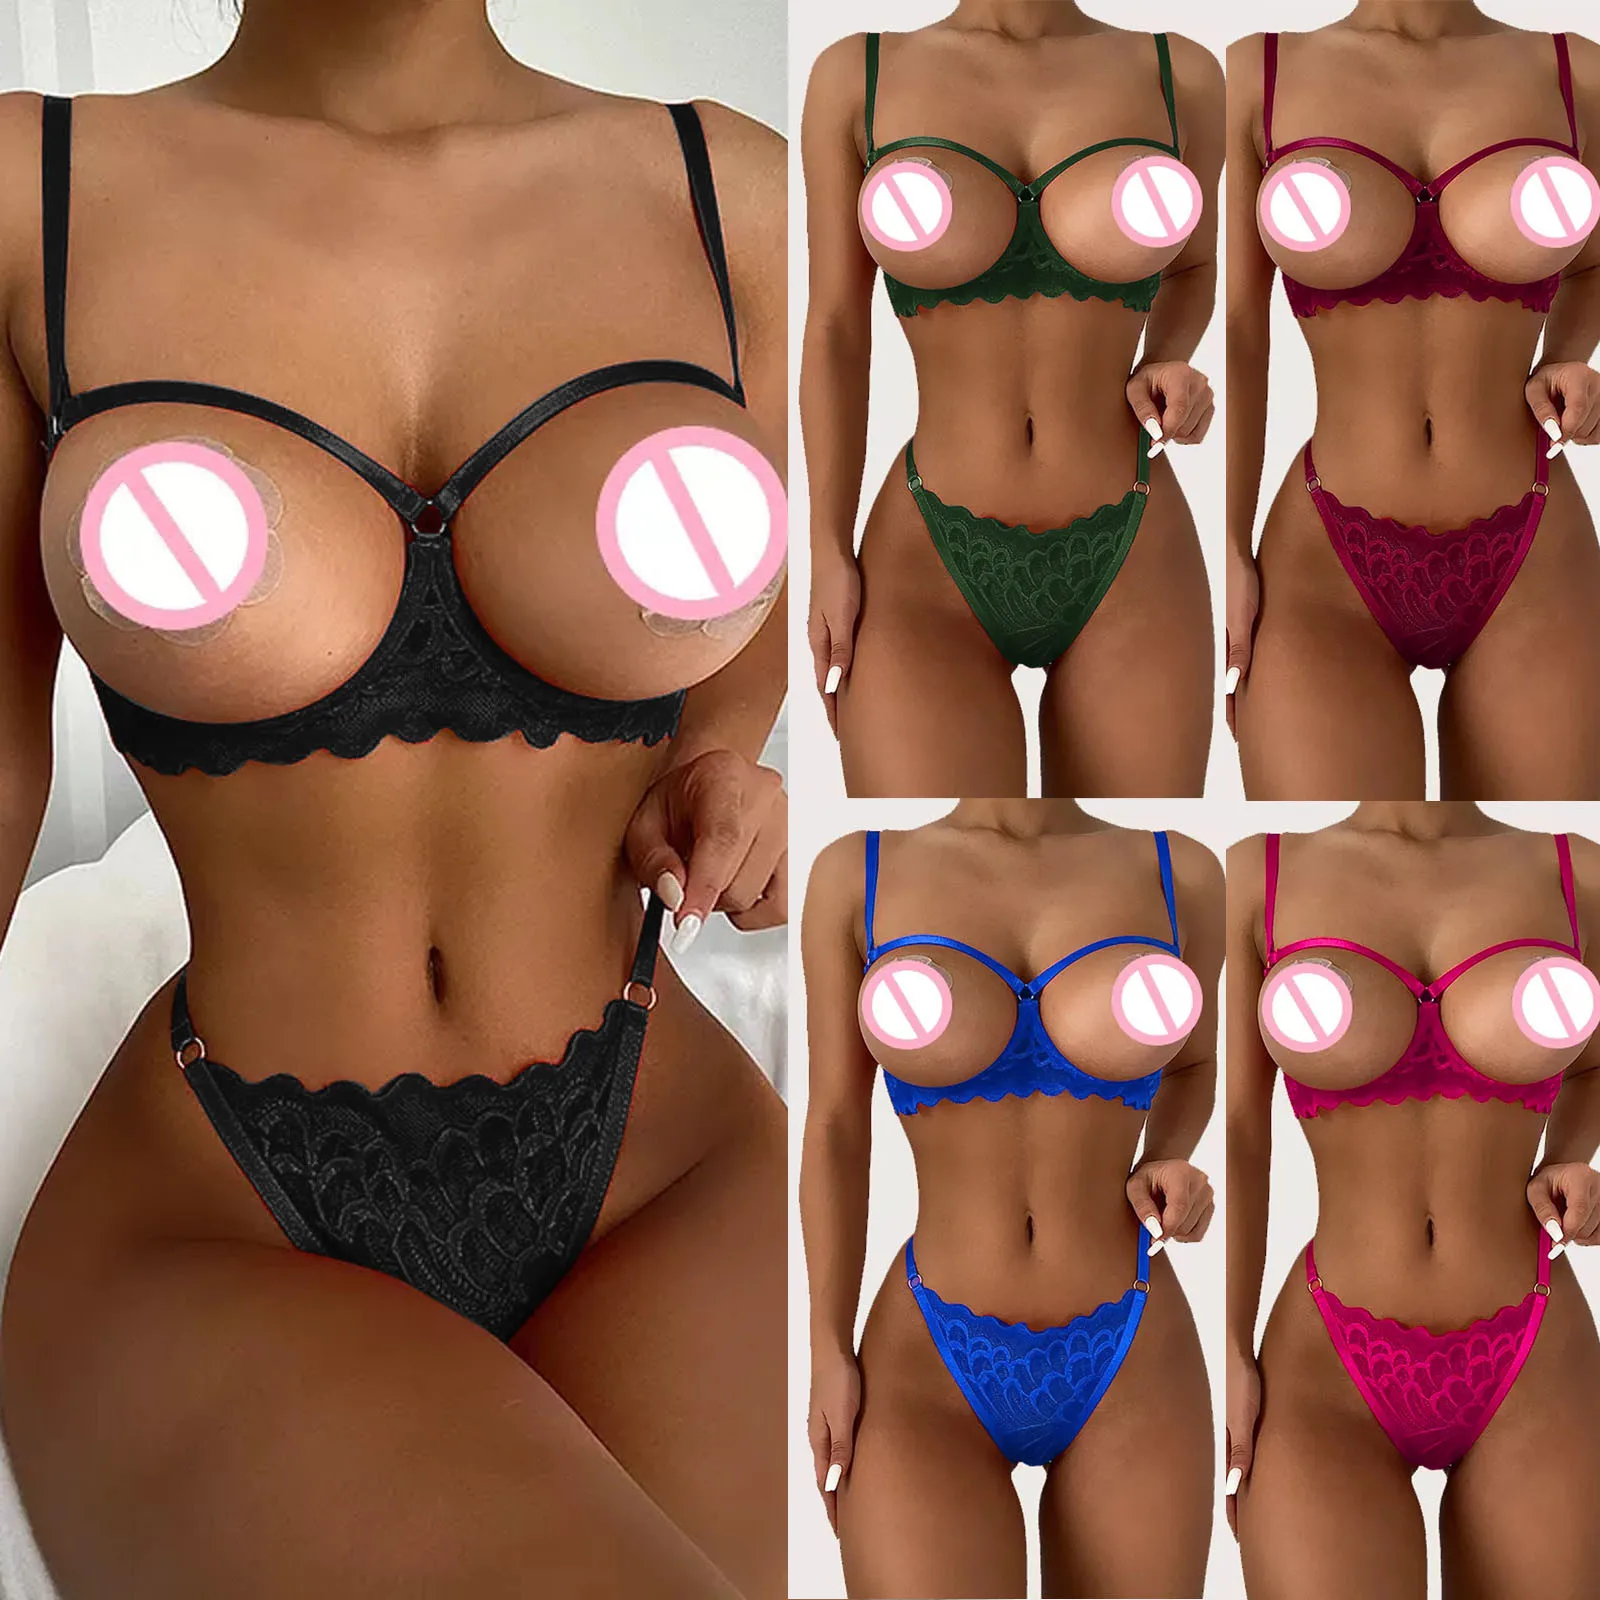 ethika set Sexy Bowknot Bra Set Lenceria Sensual Mujer Women's Hollow Out Underwear Erotic Cut Out Bra Lingerie Sexy G String Thong Set New sexy bra and panty set